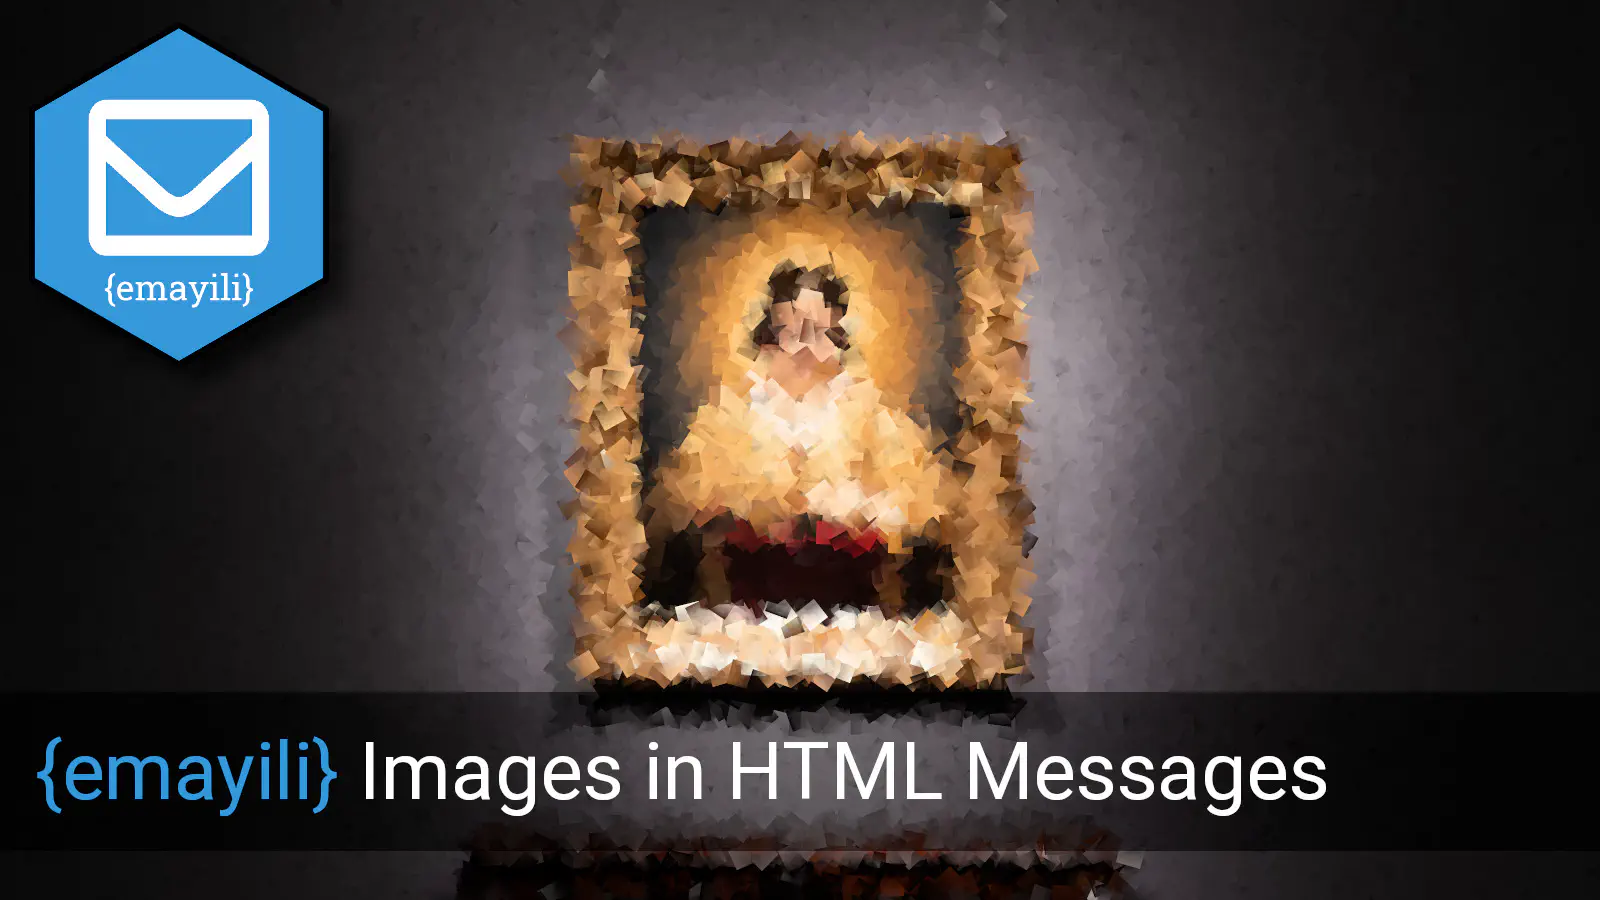 HTML Messages with Images